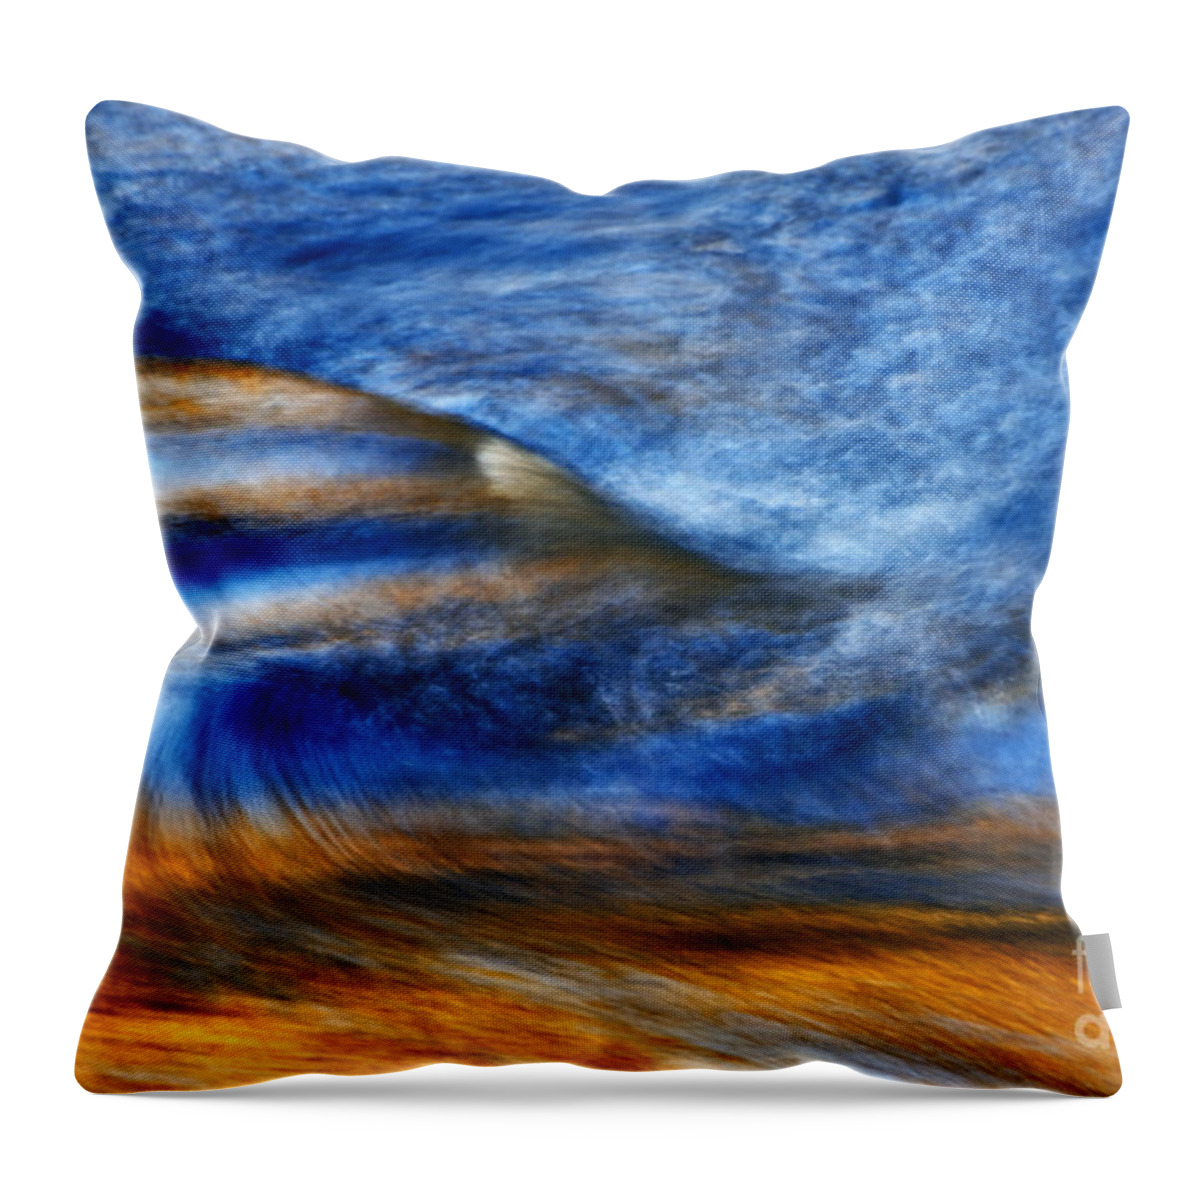 Abstract Throw Pillow featuring the photograph Tellico Abstract - D006072 by Daniel Dempster